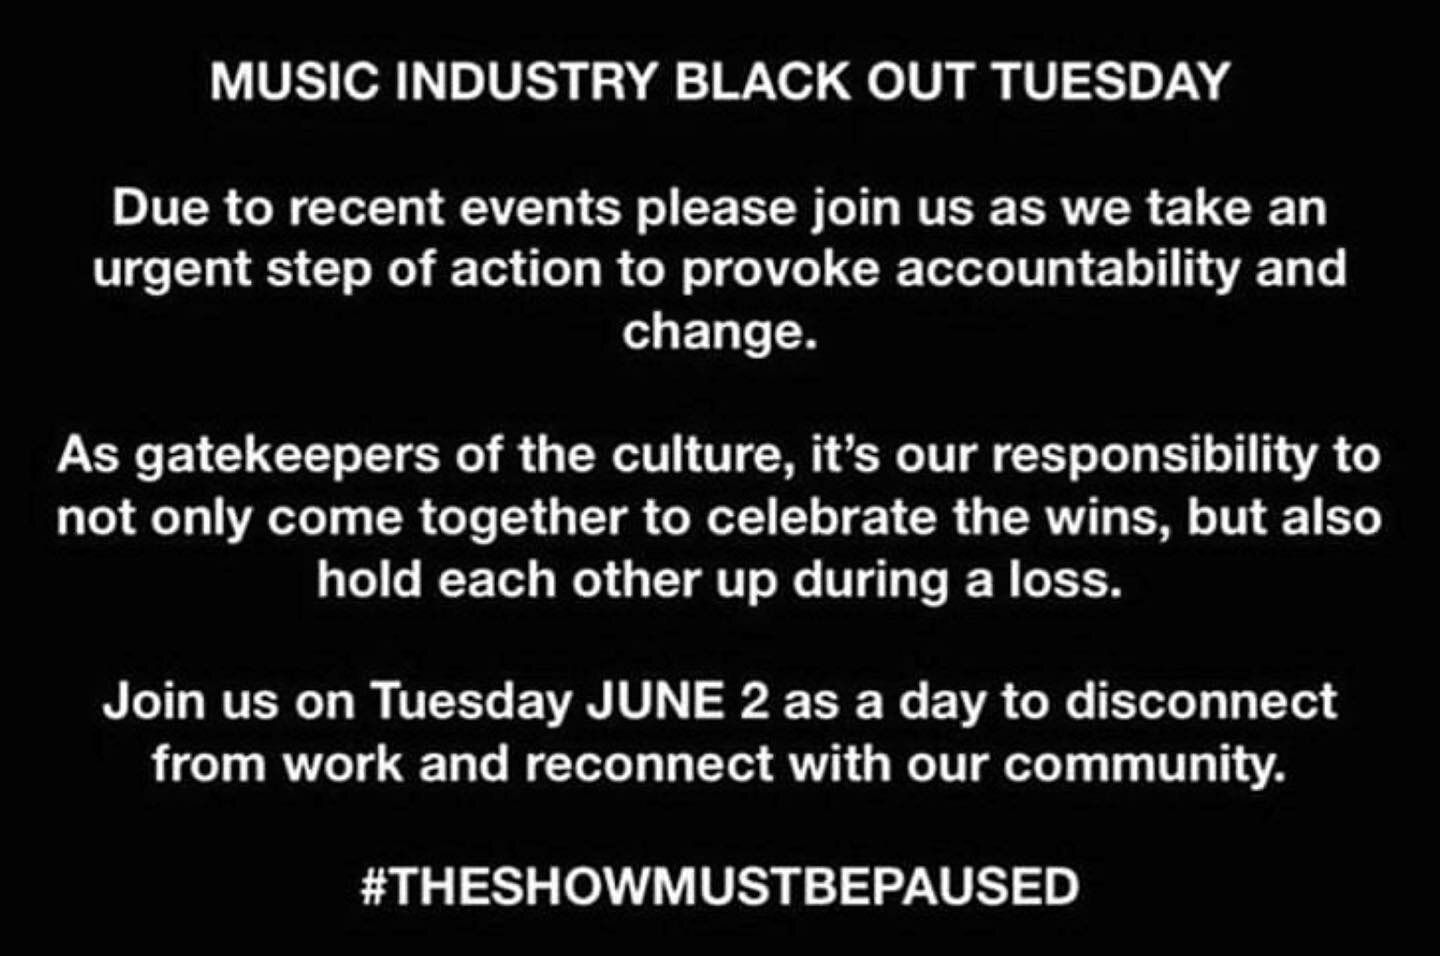 Head For West Records supports both #TheShowMustBePaused and the Black Lives Matter movement. Racism and police brutality is unacceptable. 
#BlackOutTuesday
#TheShowMustBePaused